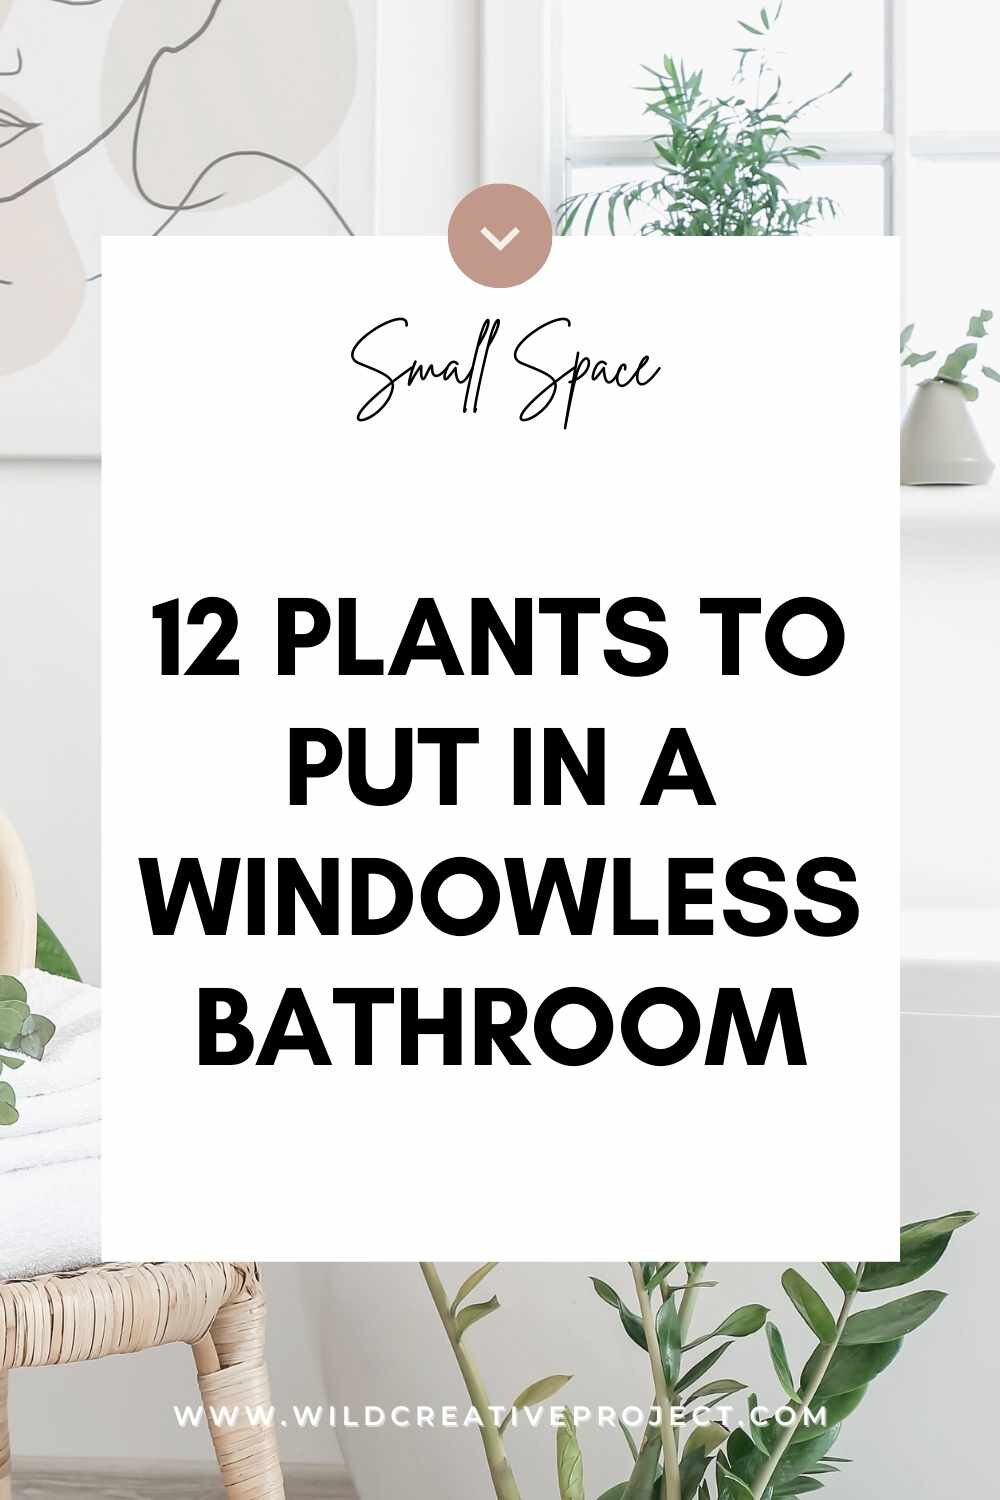  Plants That Have No Problem Growing In A Windowless Bathroom Wild Creative Project - Indoor Plants For Bathroom No Light